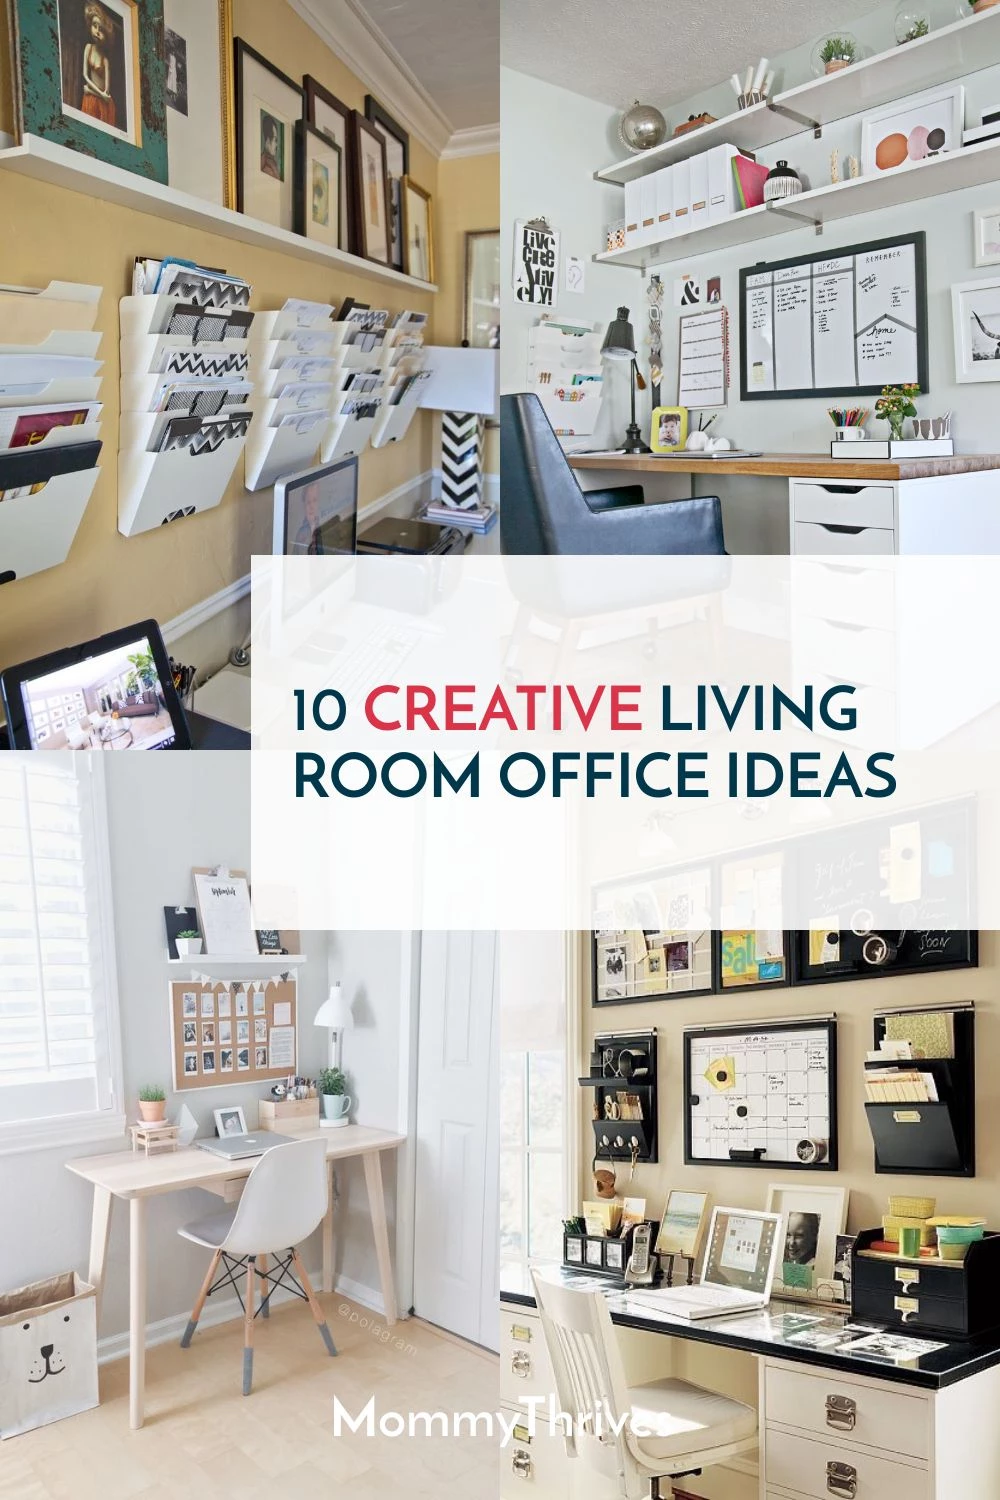 How To Create A Home Office Anywhere In Your Home - MommyThrives